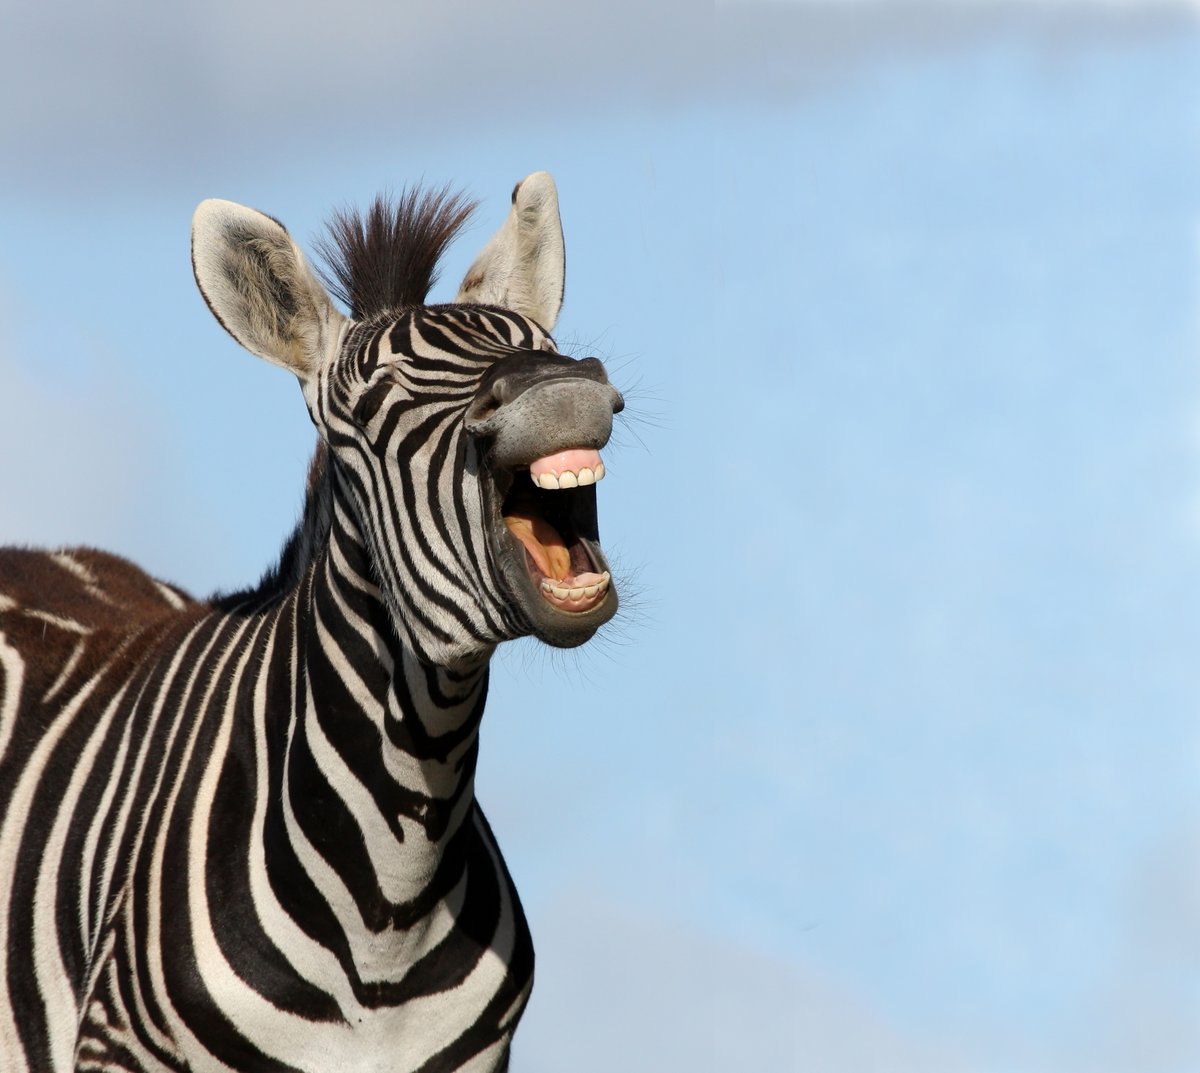 That feeling when you're able to pull off a successful #AprilFools prank 😆 #zebra #wildlife